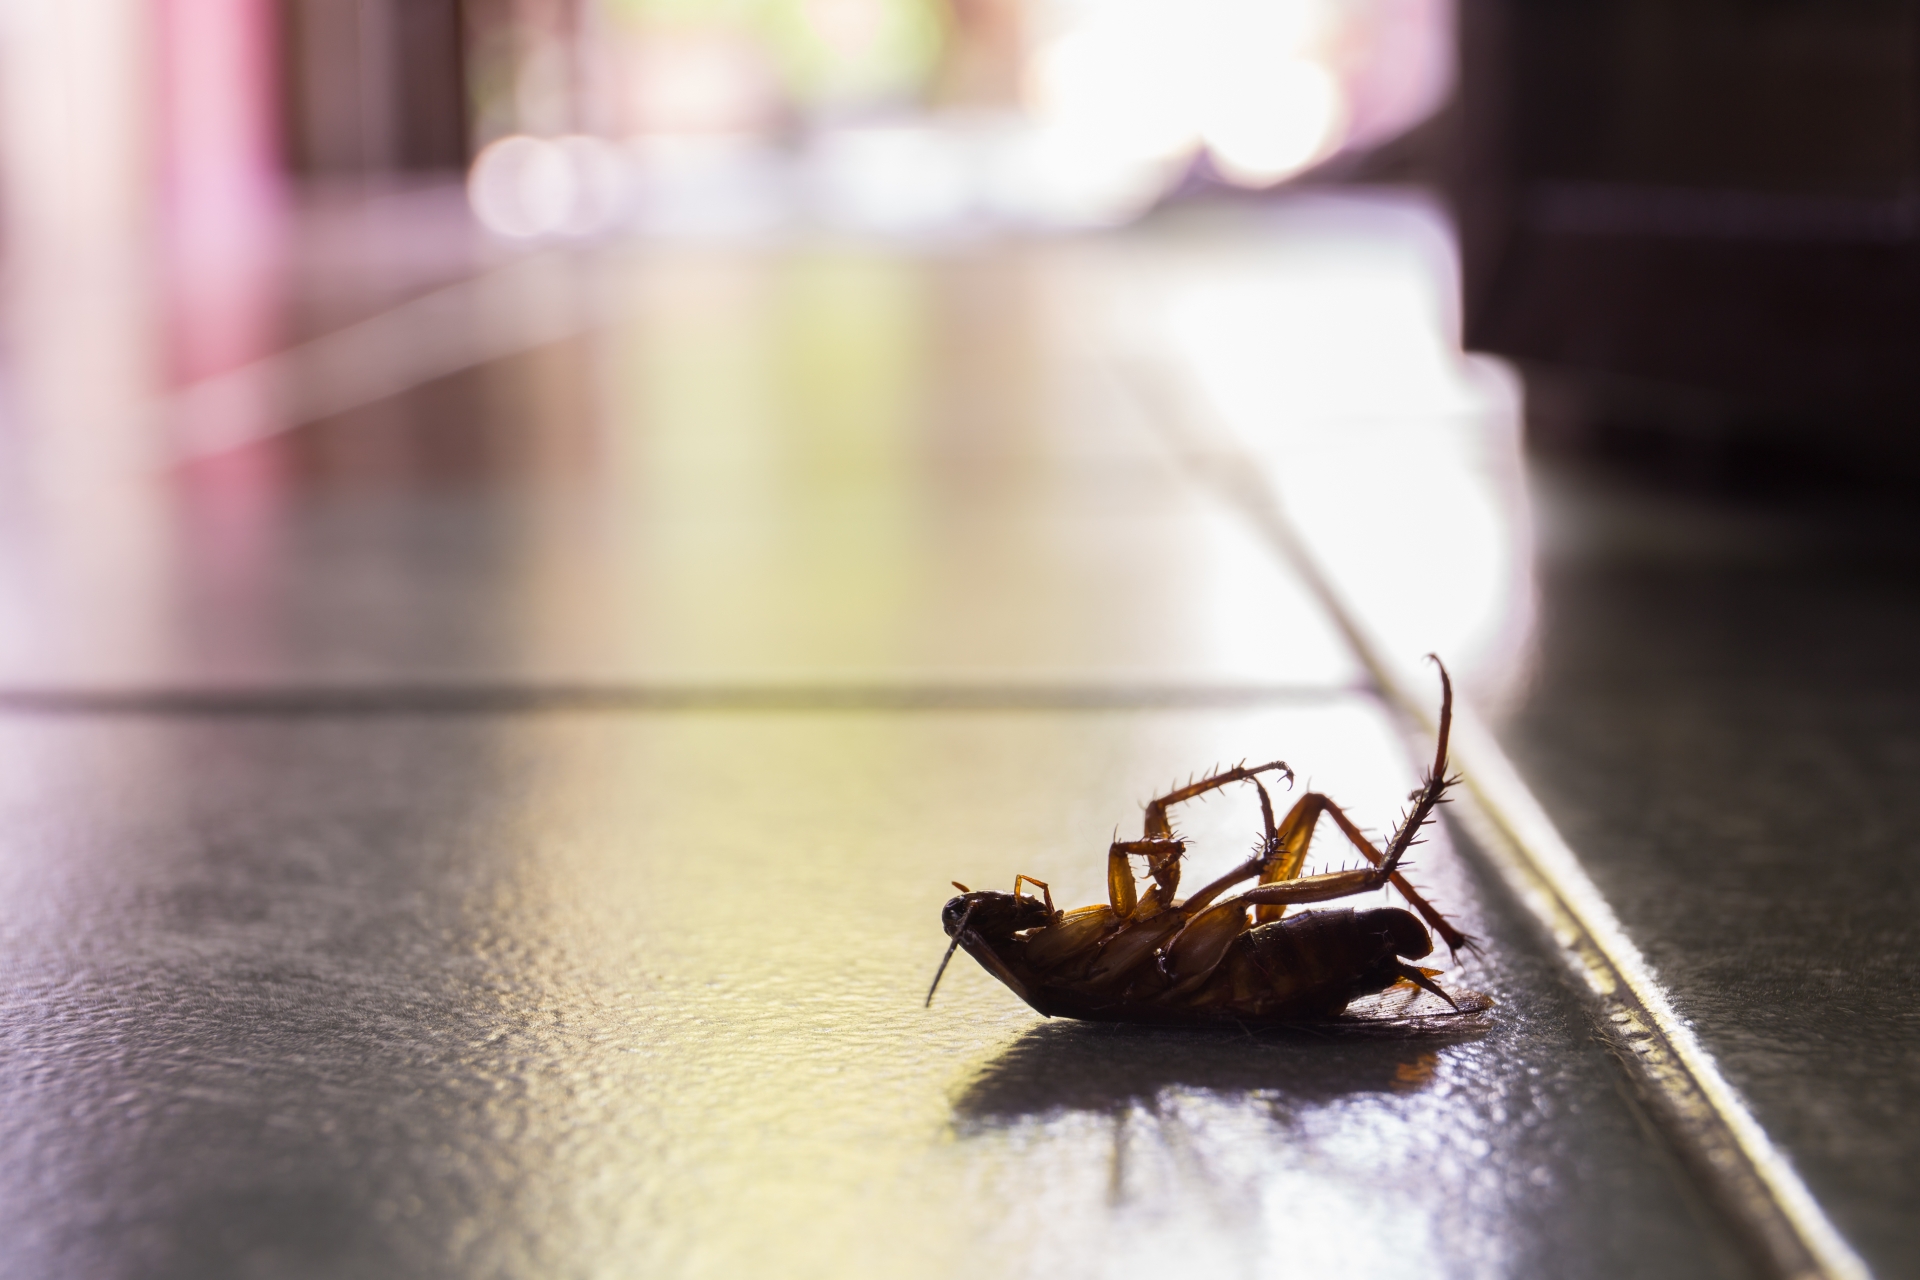 Cockroach Control, Pest Control in Friern Barnet, New Southgate, N11. Call Now 020 8166 9746